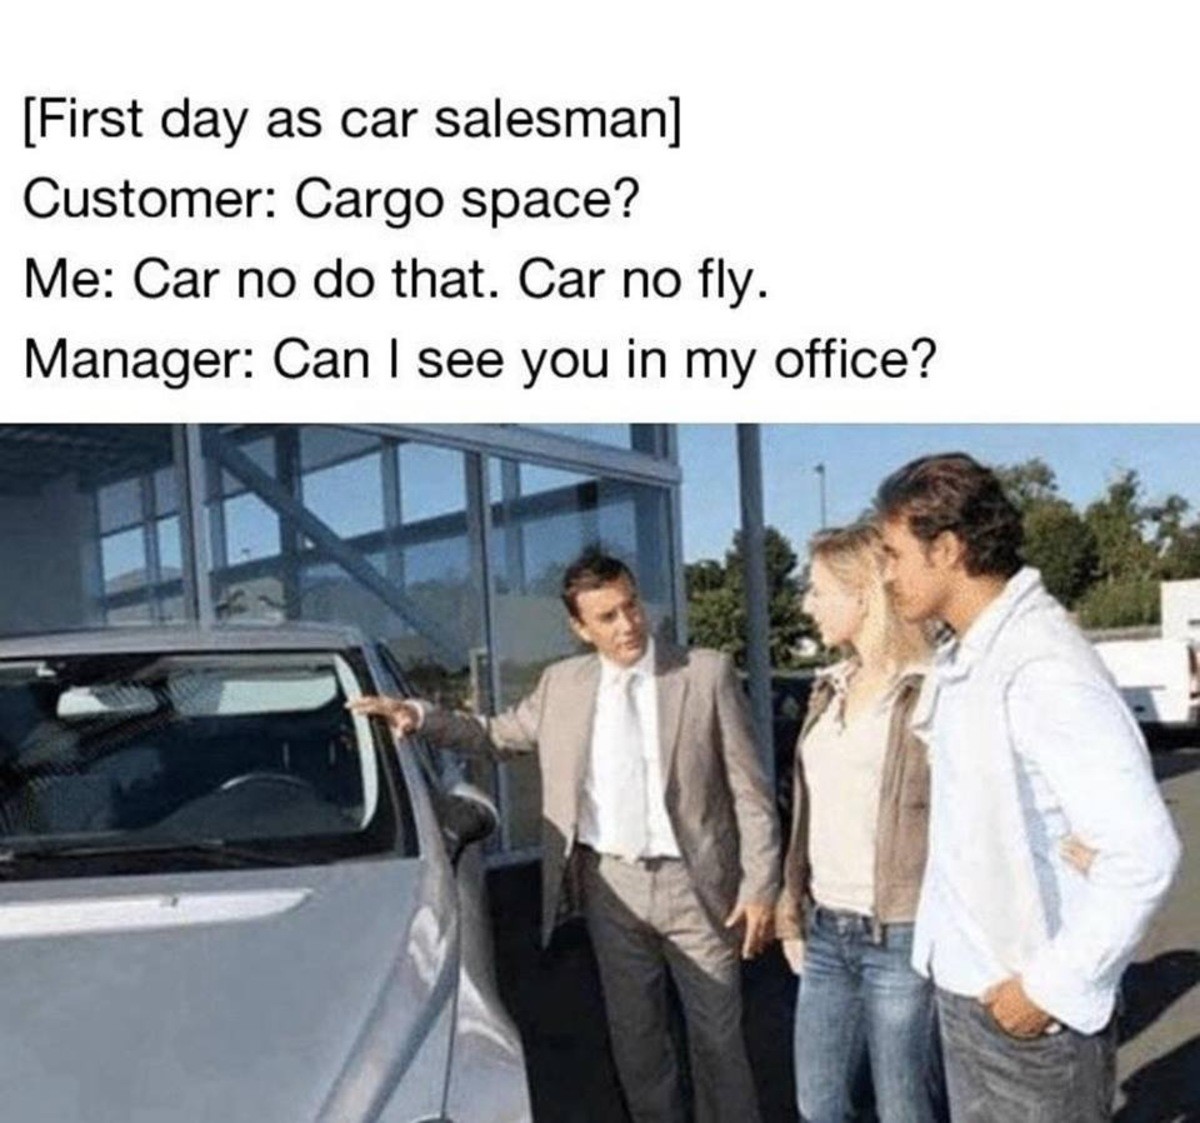 car salesman meme - First day as car salesman Customer Cargo space? Me Car no do that. Car no fly. Manager Can I see you in my office?